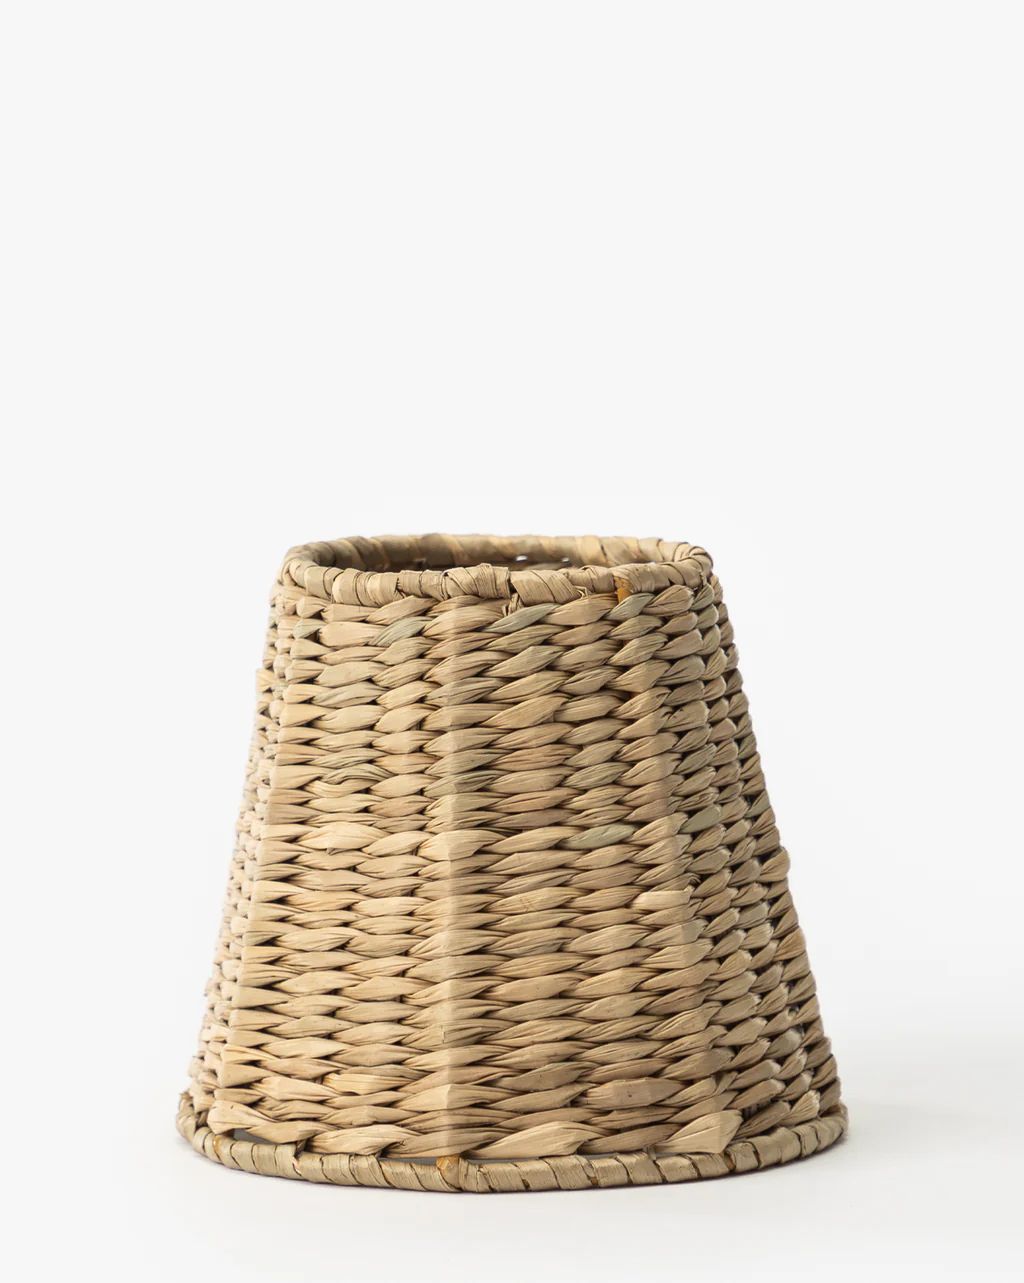 Seagrass Lamp Shade | McGee & Co.